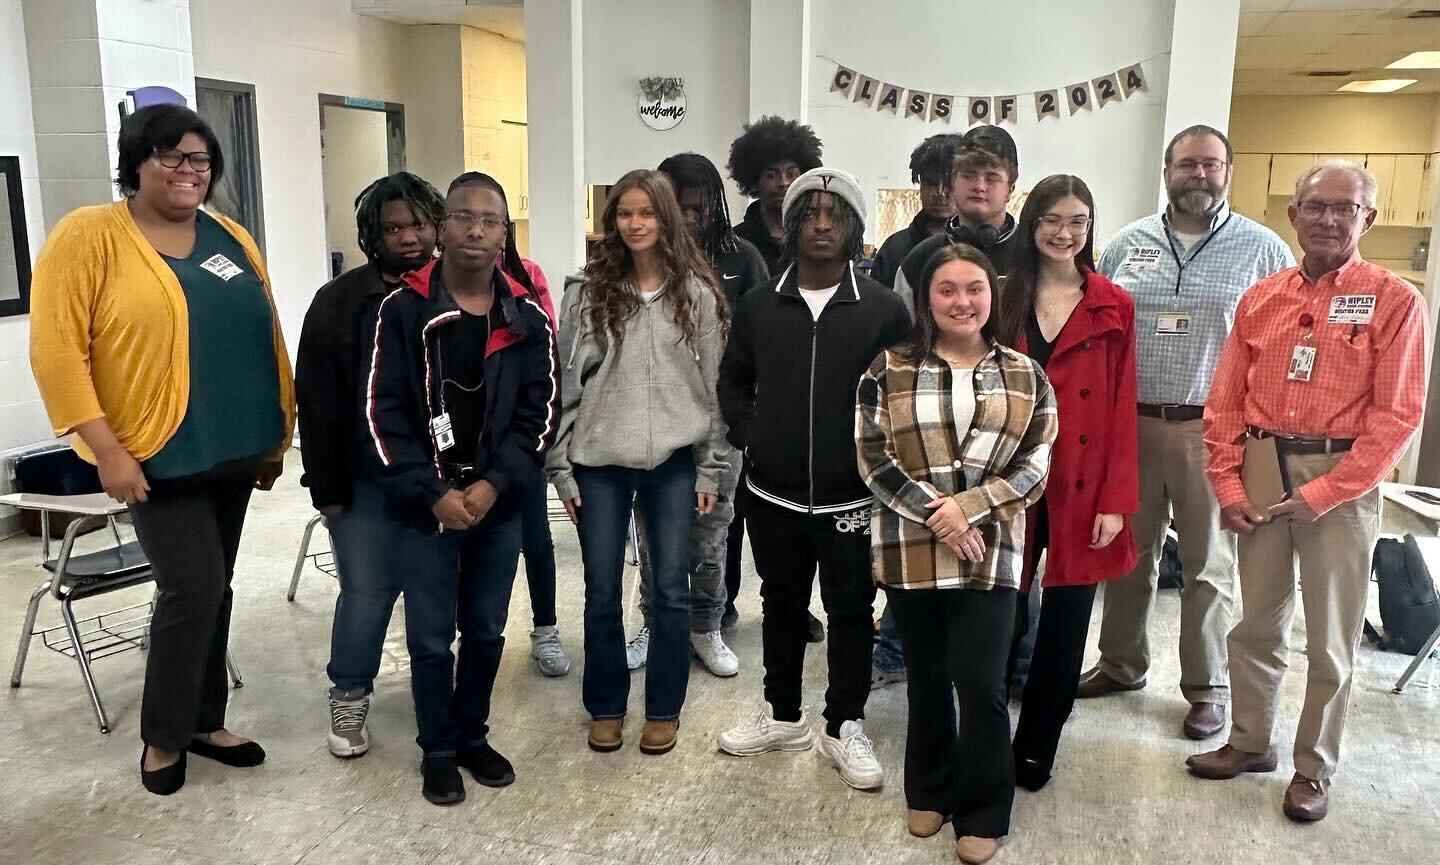 Preparation, practice, and positivity is what these students of the @ripleyhighschool JAGTN program were demonstrating as they participated in Mock Interviews with some prominent local HR Personnel: Tim York of Marvin Windows and Doors, Manika Moore 